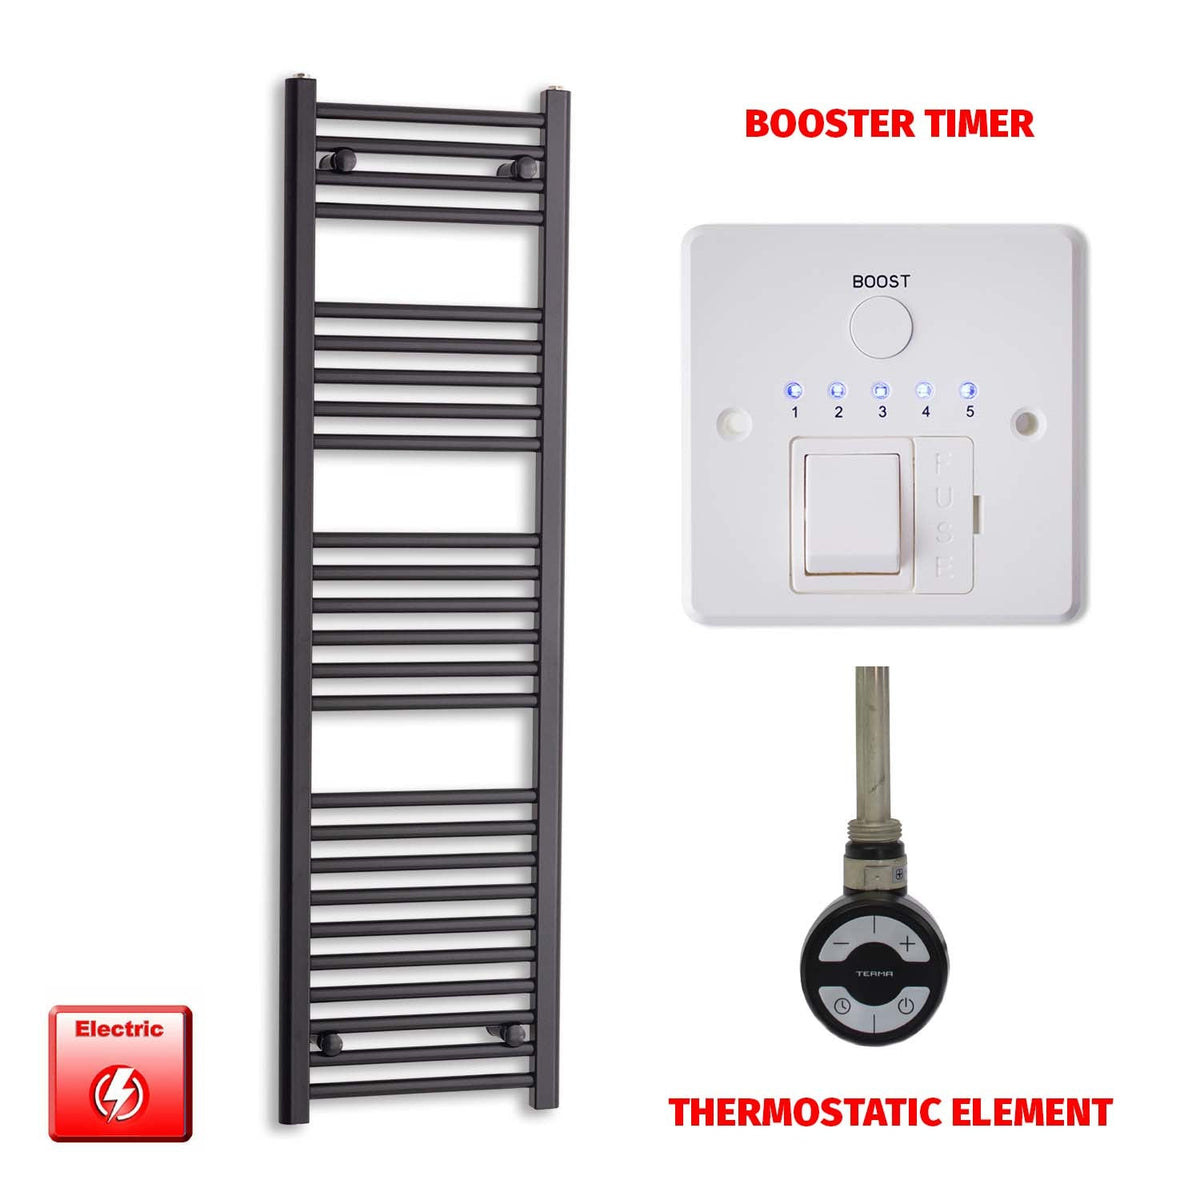 1400 x 450 Flat Black Pre-Filled Electric Heated Towel Radiator HTR MOA Thermostatic Booster Timer